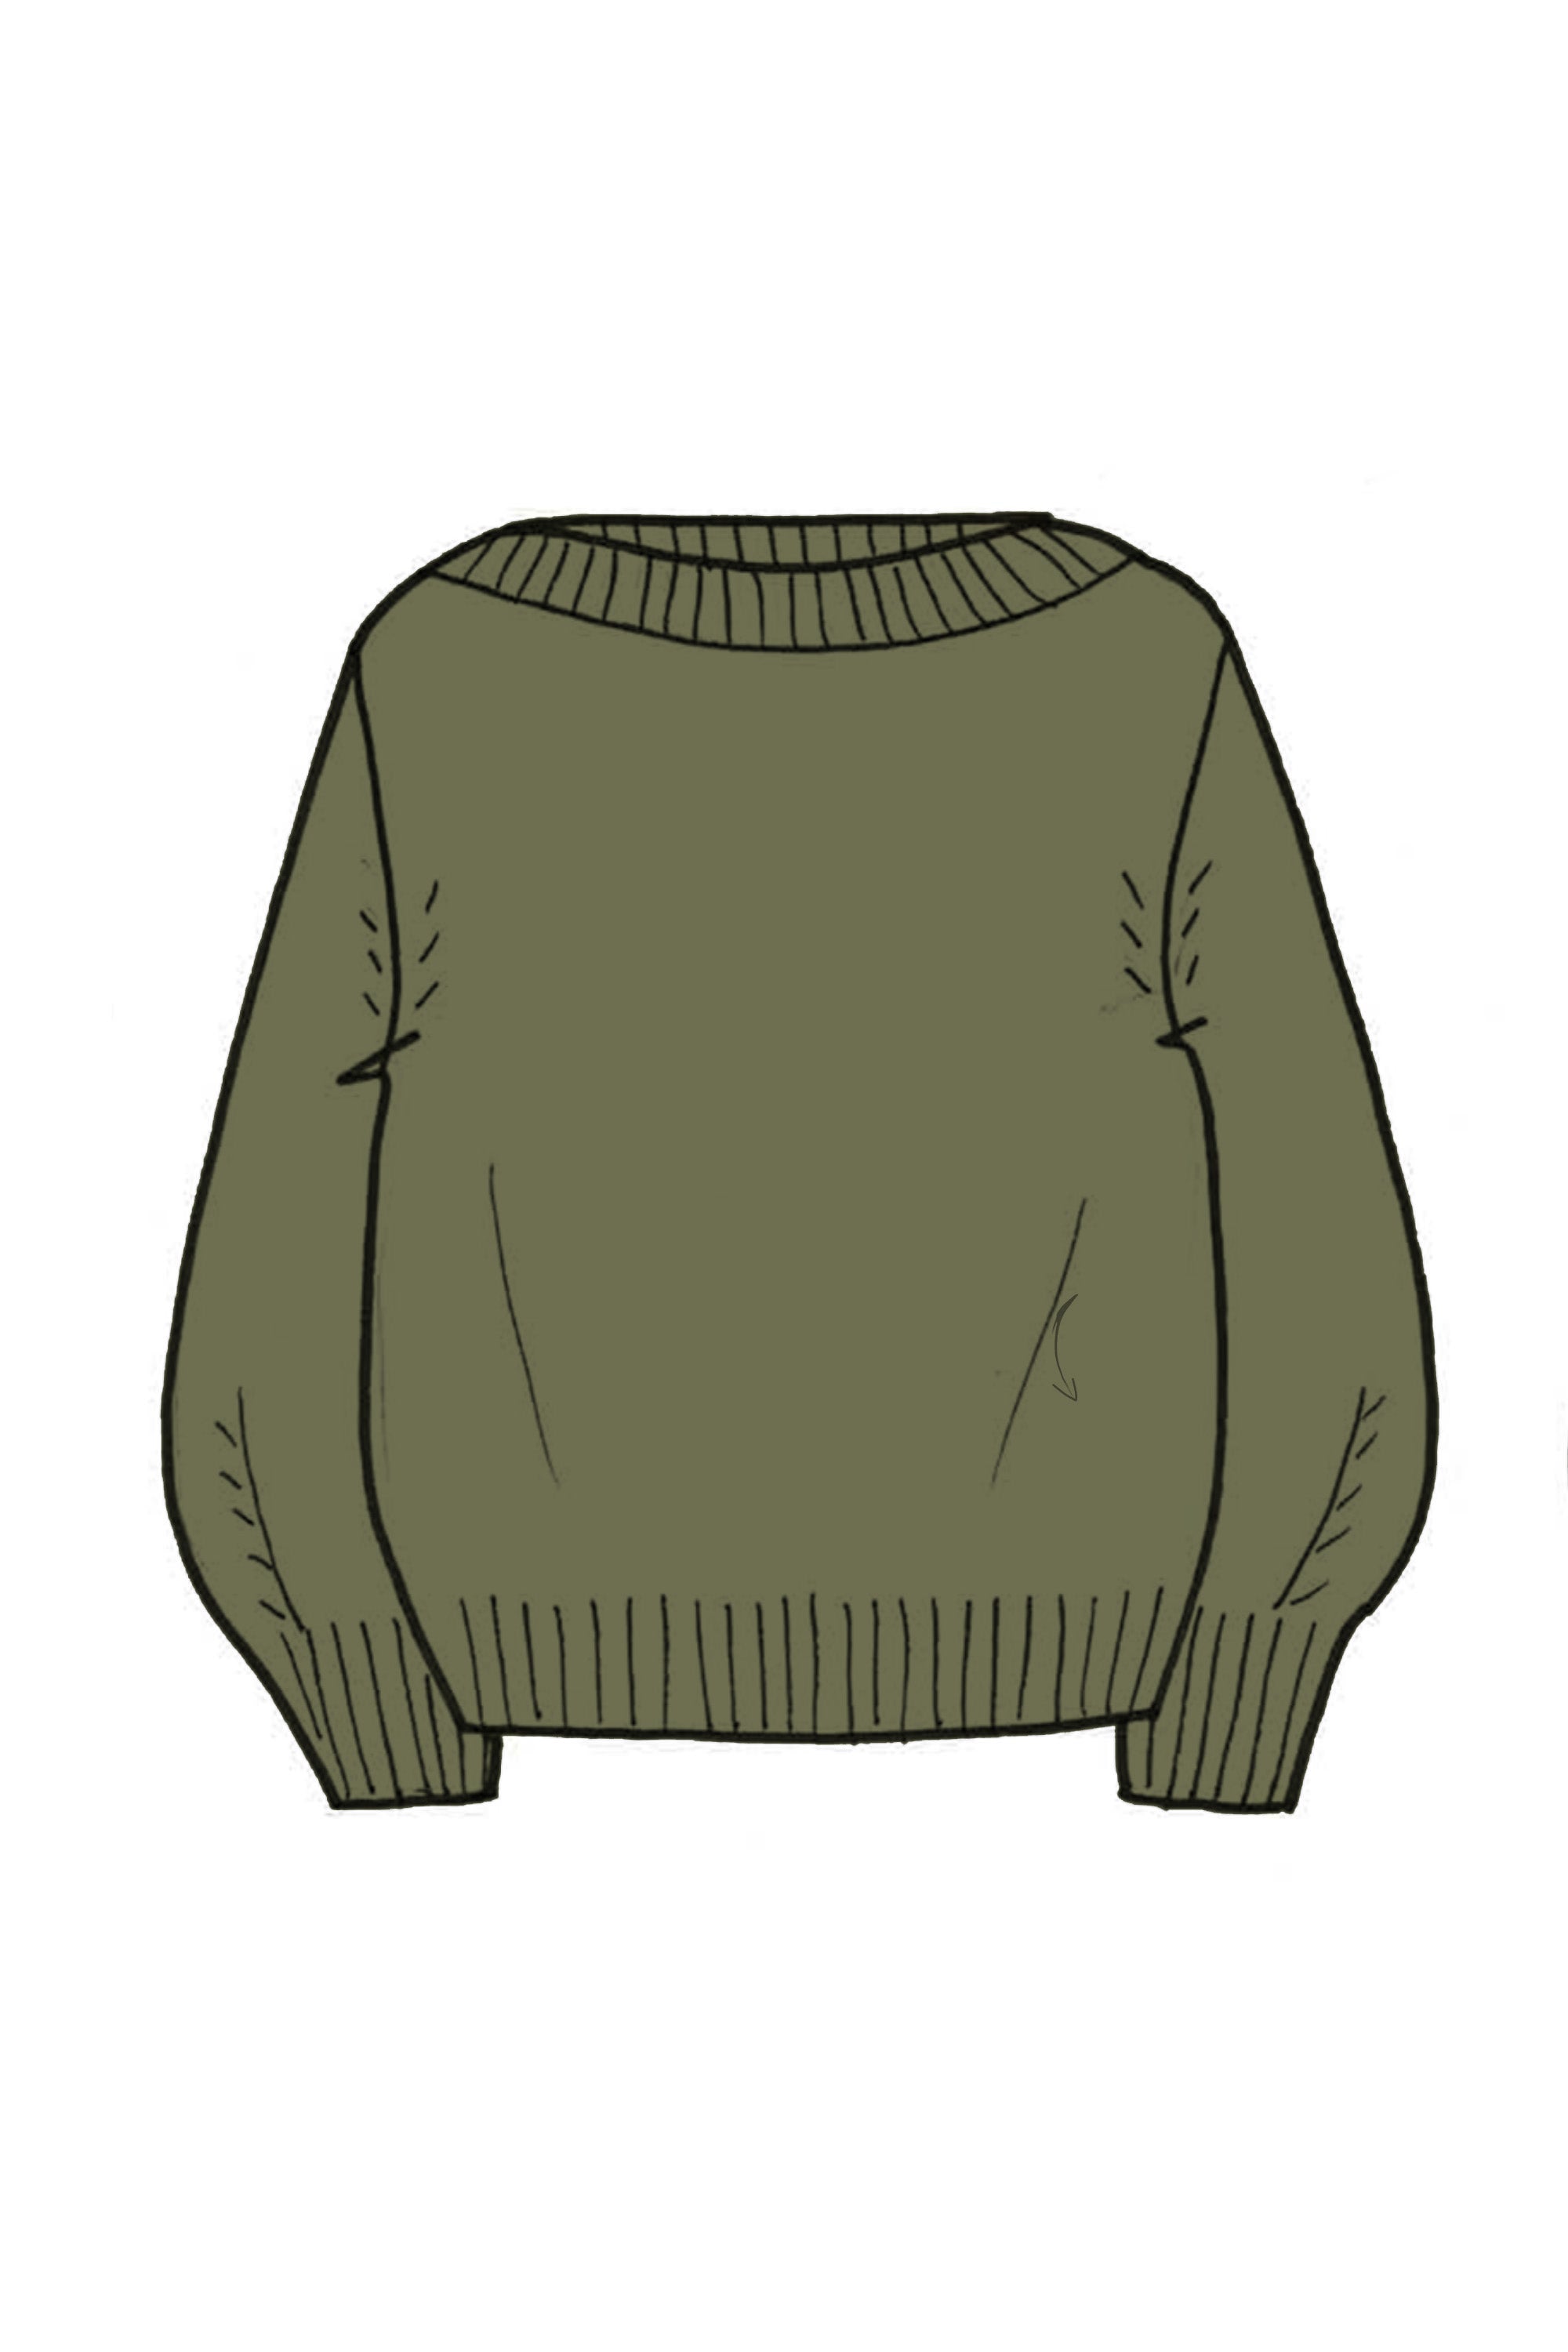 Lofty Oversized Crew Neck Cashmere Sweater - Made to Order